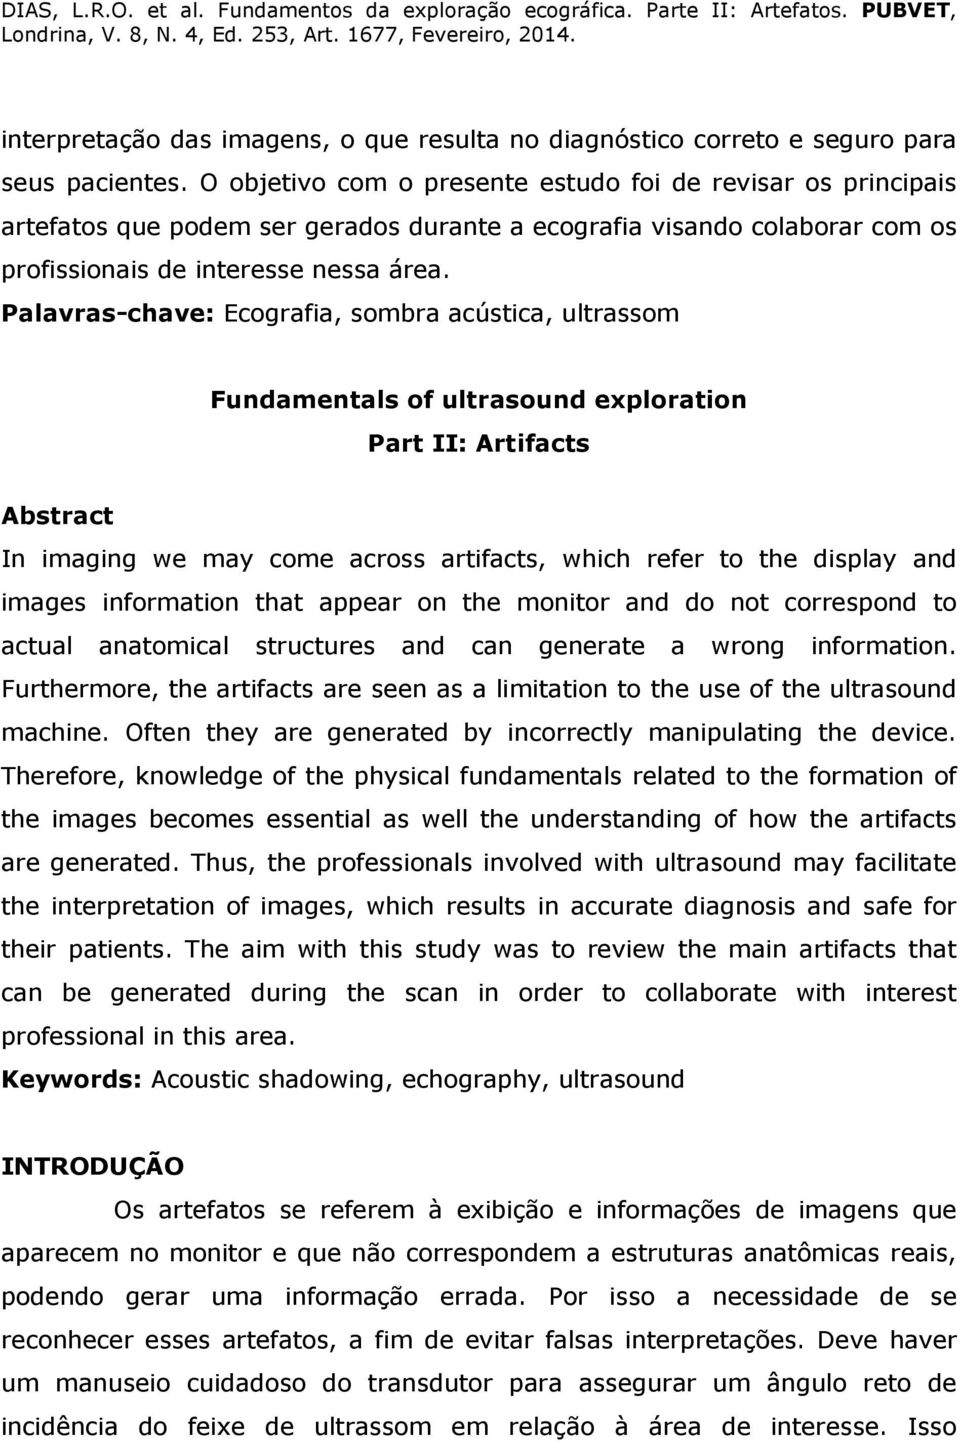 Palavras-chave: Ecografia, sombra acústica, ultrassom Fundamentals of ultrasound exploration Part II: Artifacts Abstract In imaging we may come across artifacts, which refer to the display and images